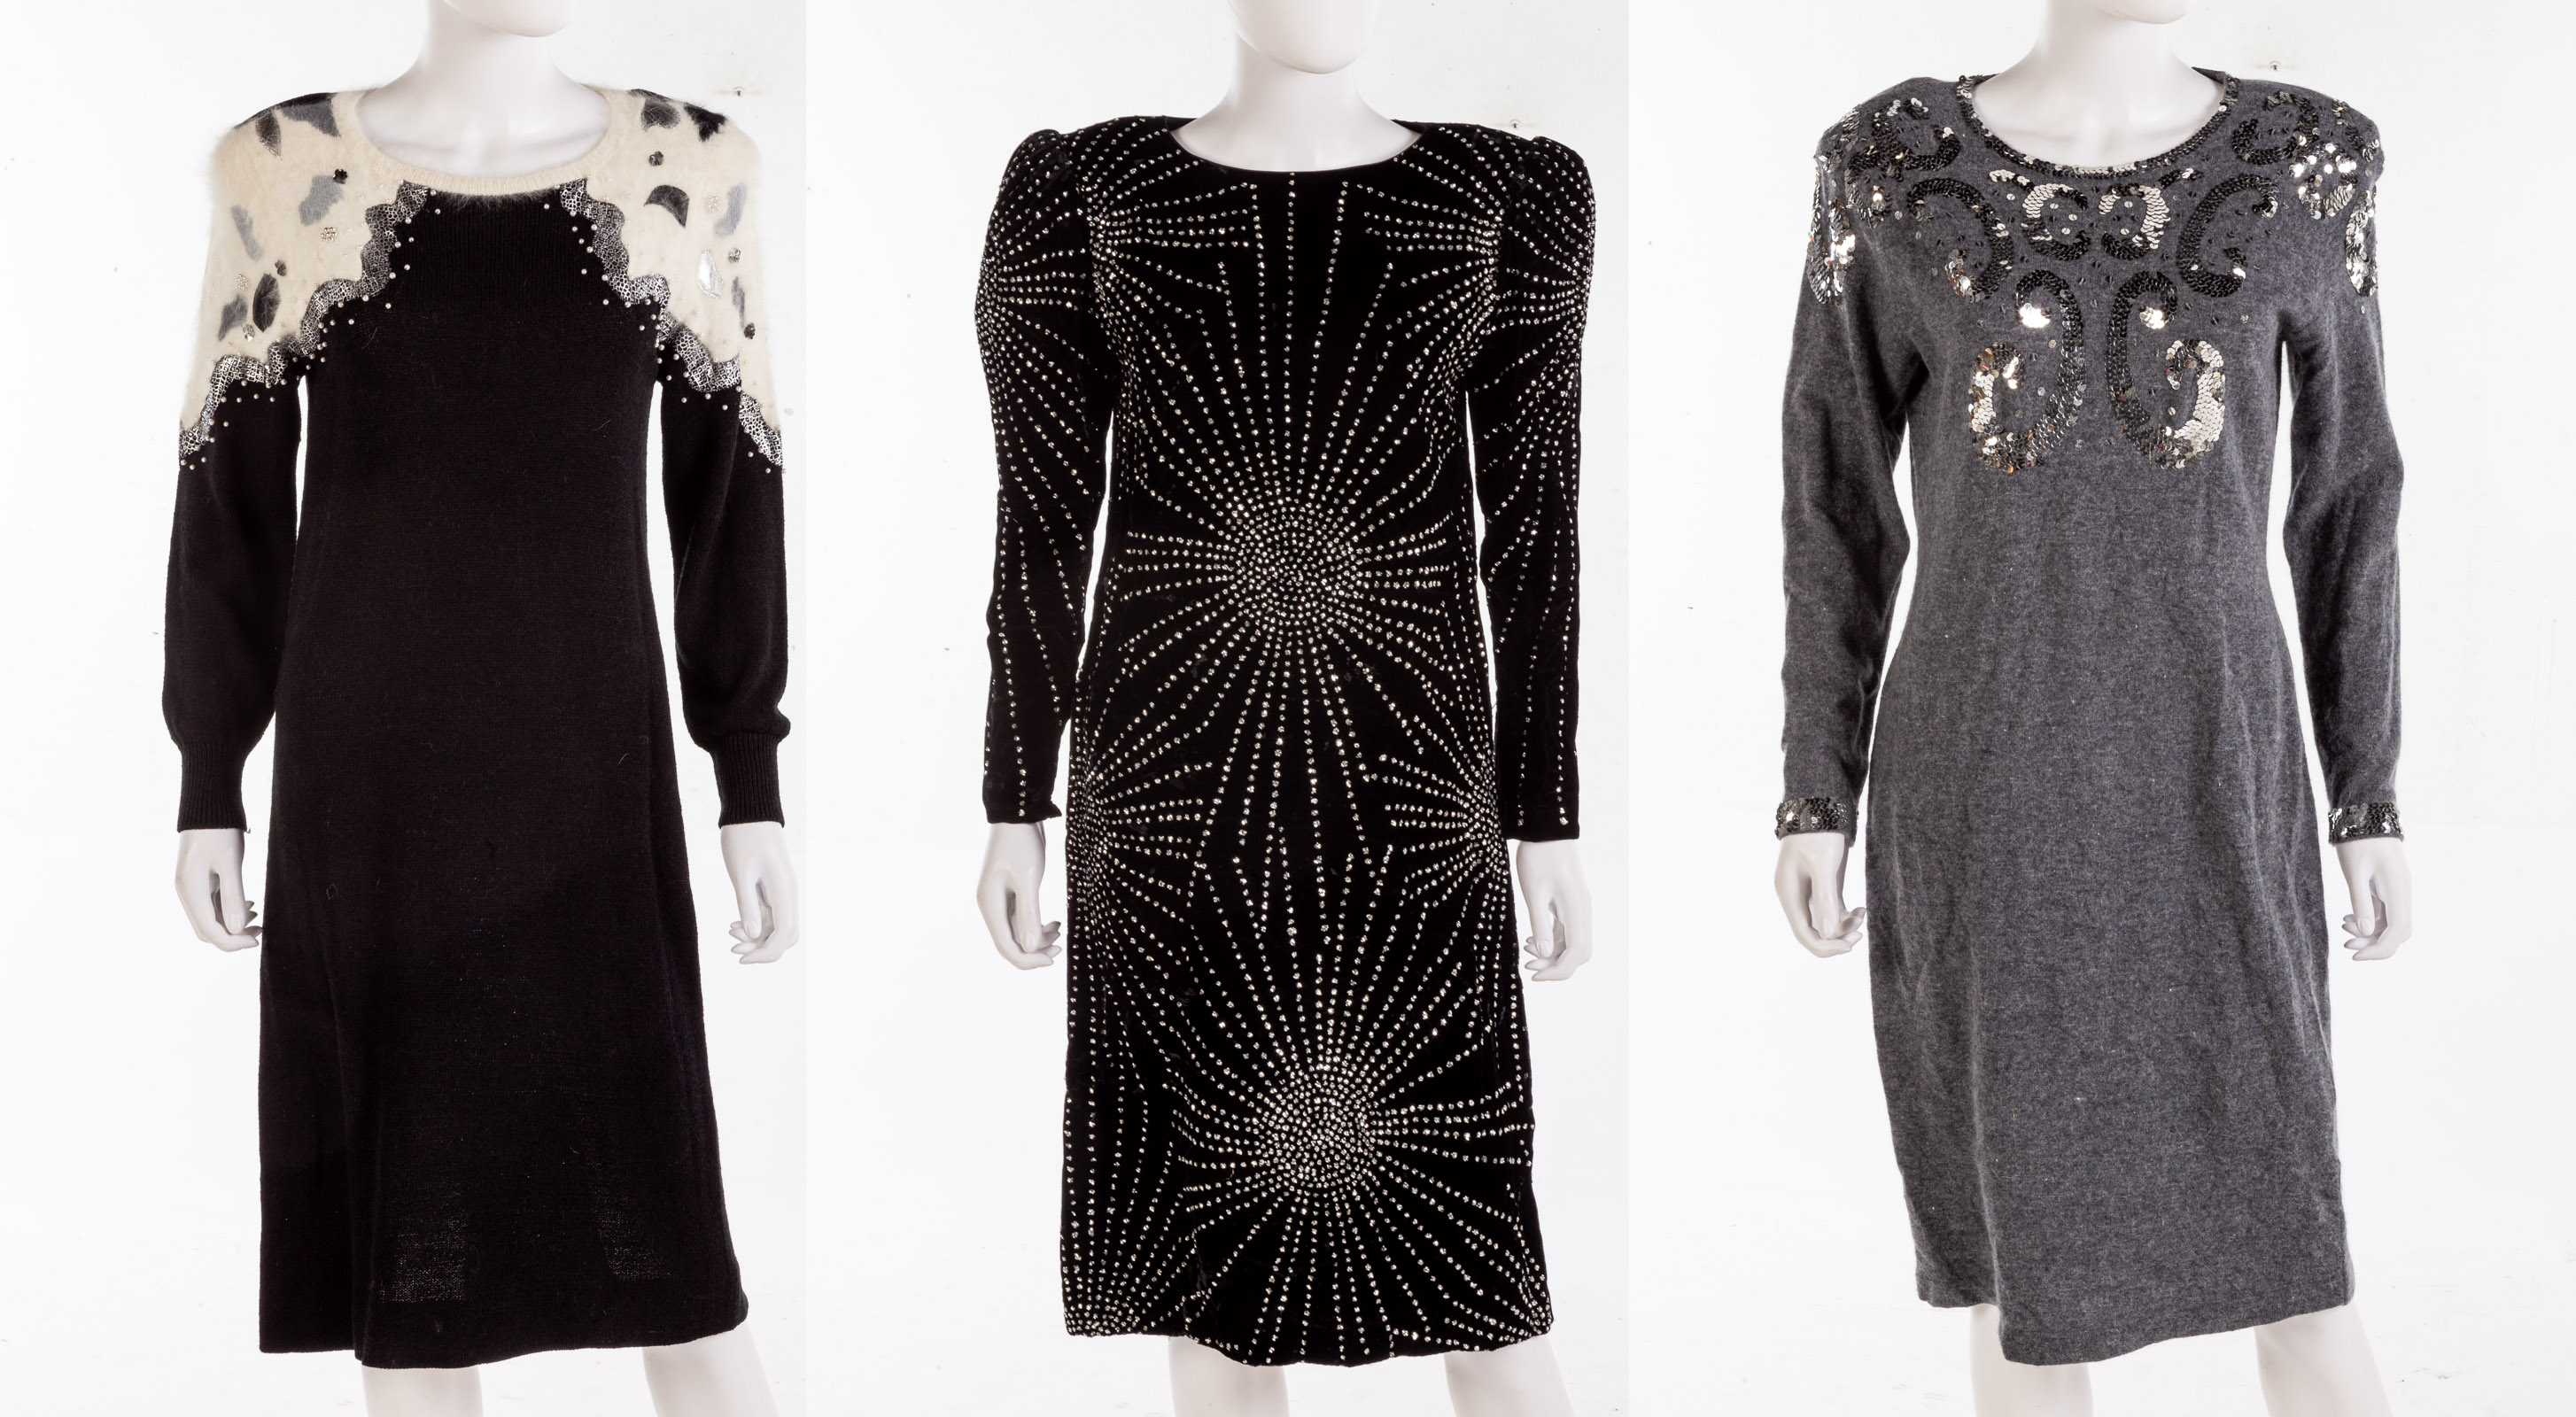 COLLECTION OF KNIT AND VELVET DRESSES